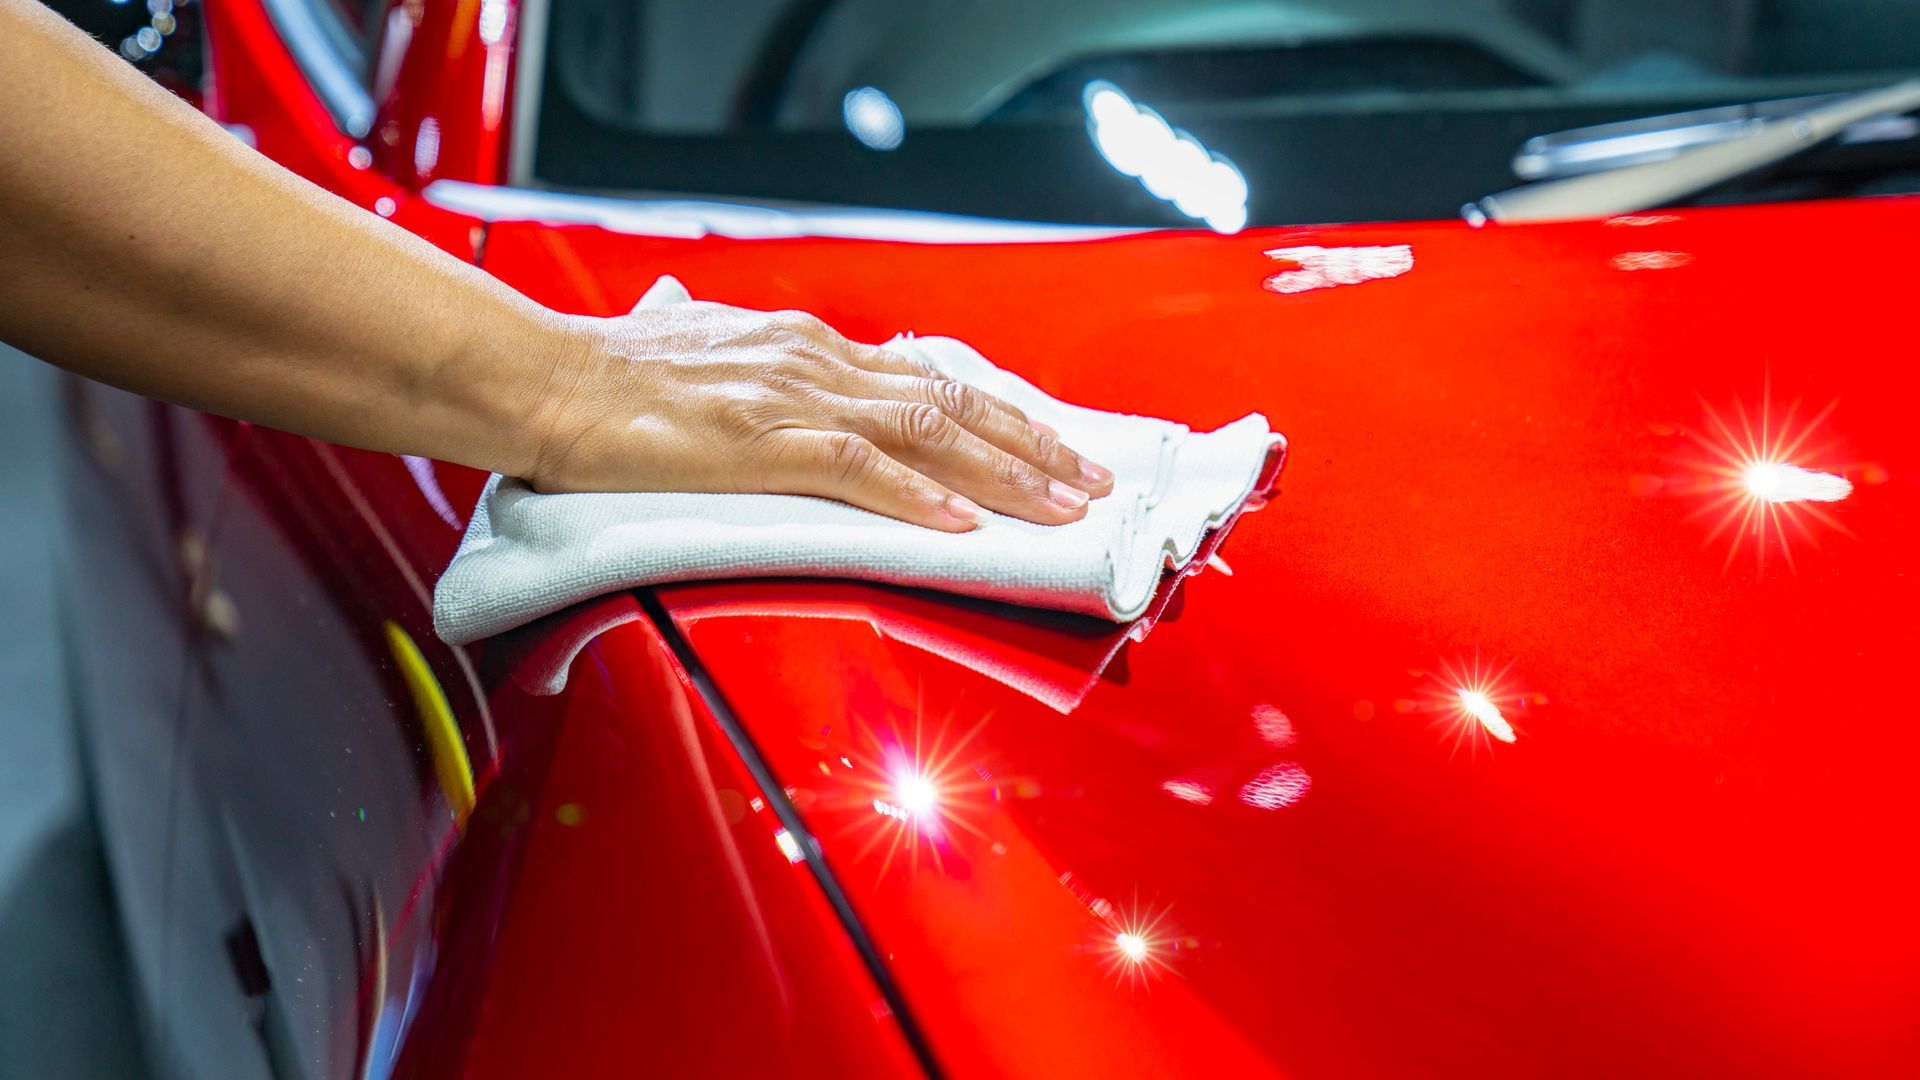 A person is cleaning a red car with a towel - Eustis, FL - Bay Street Paint and Body